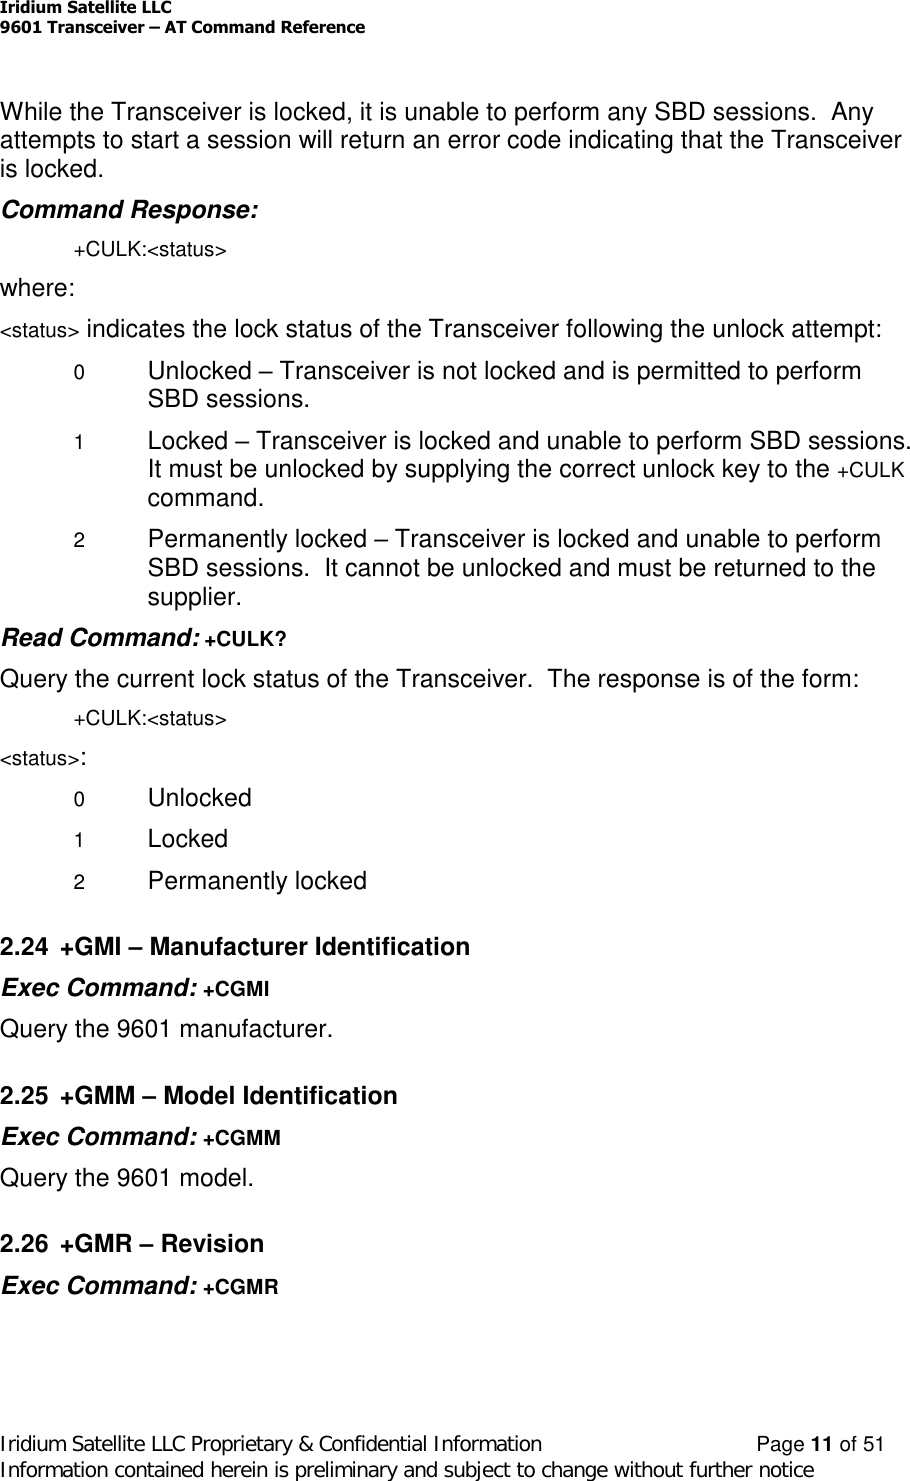 Iridium Satellite LLC9601 Transceiver –AT Command ReferenceIridium Satellite LLC Proprietary &amp; Confidential Information Page 11 of 51Information contained herein is preliminary and subject to change without further noticeWhile the Transceiver is locked, it is unable to perform any SBD sessions. Anyattempts to start a session will return an error code indicating that the Transceiveris locked.Command Response:+CULK:&lt;status&gt;where:&lt;status&gt; indicates the lock status of the Transceiver following the unlock attempt:0Unlocked –Transceiver is not locked and is permitted to performSBD sessions.1Locked –Transceiver is locked and unable to perform SBD sessions.It must be unlocked by supplying the correct unlock key to the +CULKcommand.2Permanently locked –Transceiver is locked and unable to performSBD sessions. It cannot be unlocked and must be returned to thesupplier.Read Command: +CULK?Query the current lock status of the Transceiver. The response is of the form:+CULK:&lt;status&gt;&lt;status&gt;:0Unlocked1Locked2Permanently locked2.24 +GMI –Manufacturer IdentificationExec Command: +CGMIQuery the 9601 manufacturer.2.25 +GMM –Model IdentificationExec Command: +CGMMQuery the 9601 model.2.26 +GMR –RevisionExec Command: +CGMR